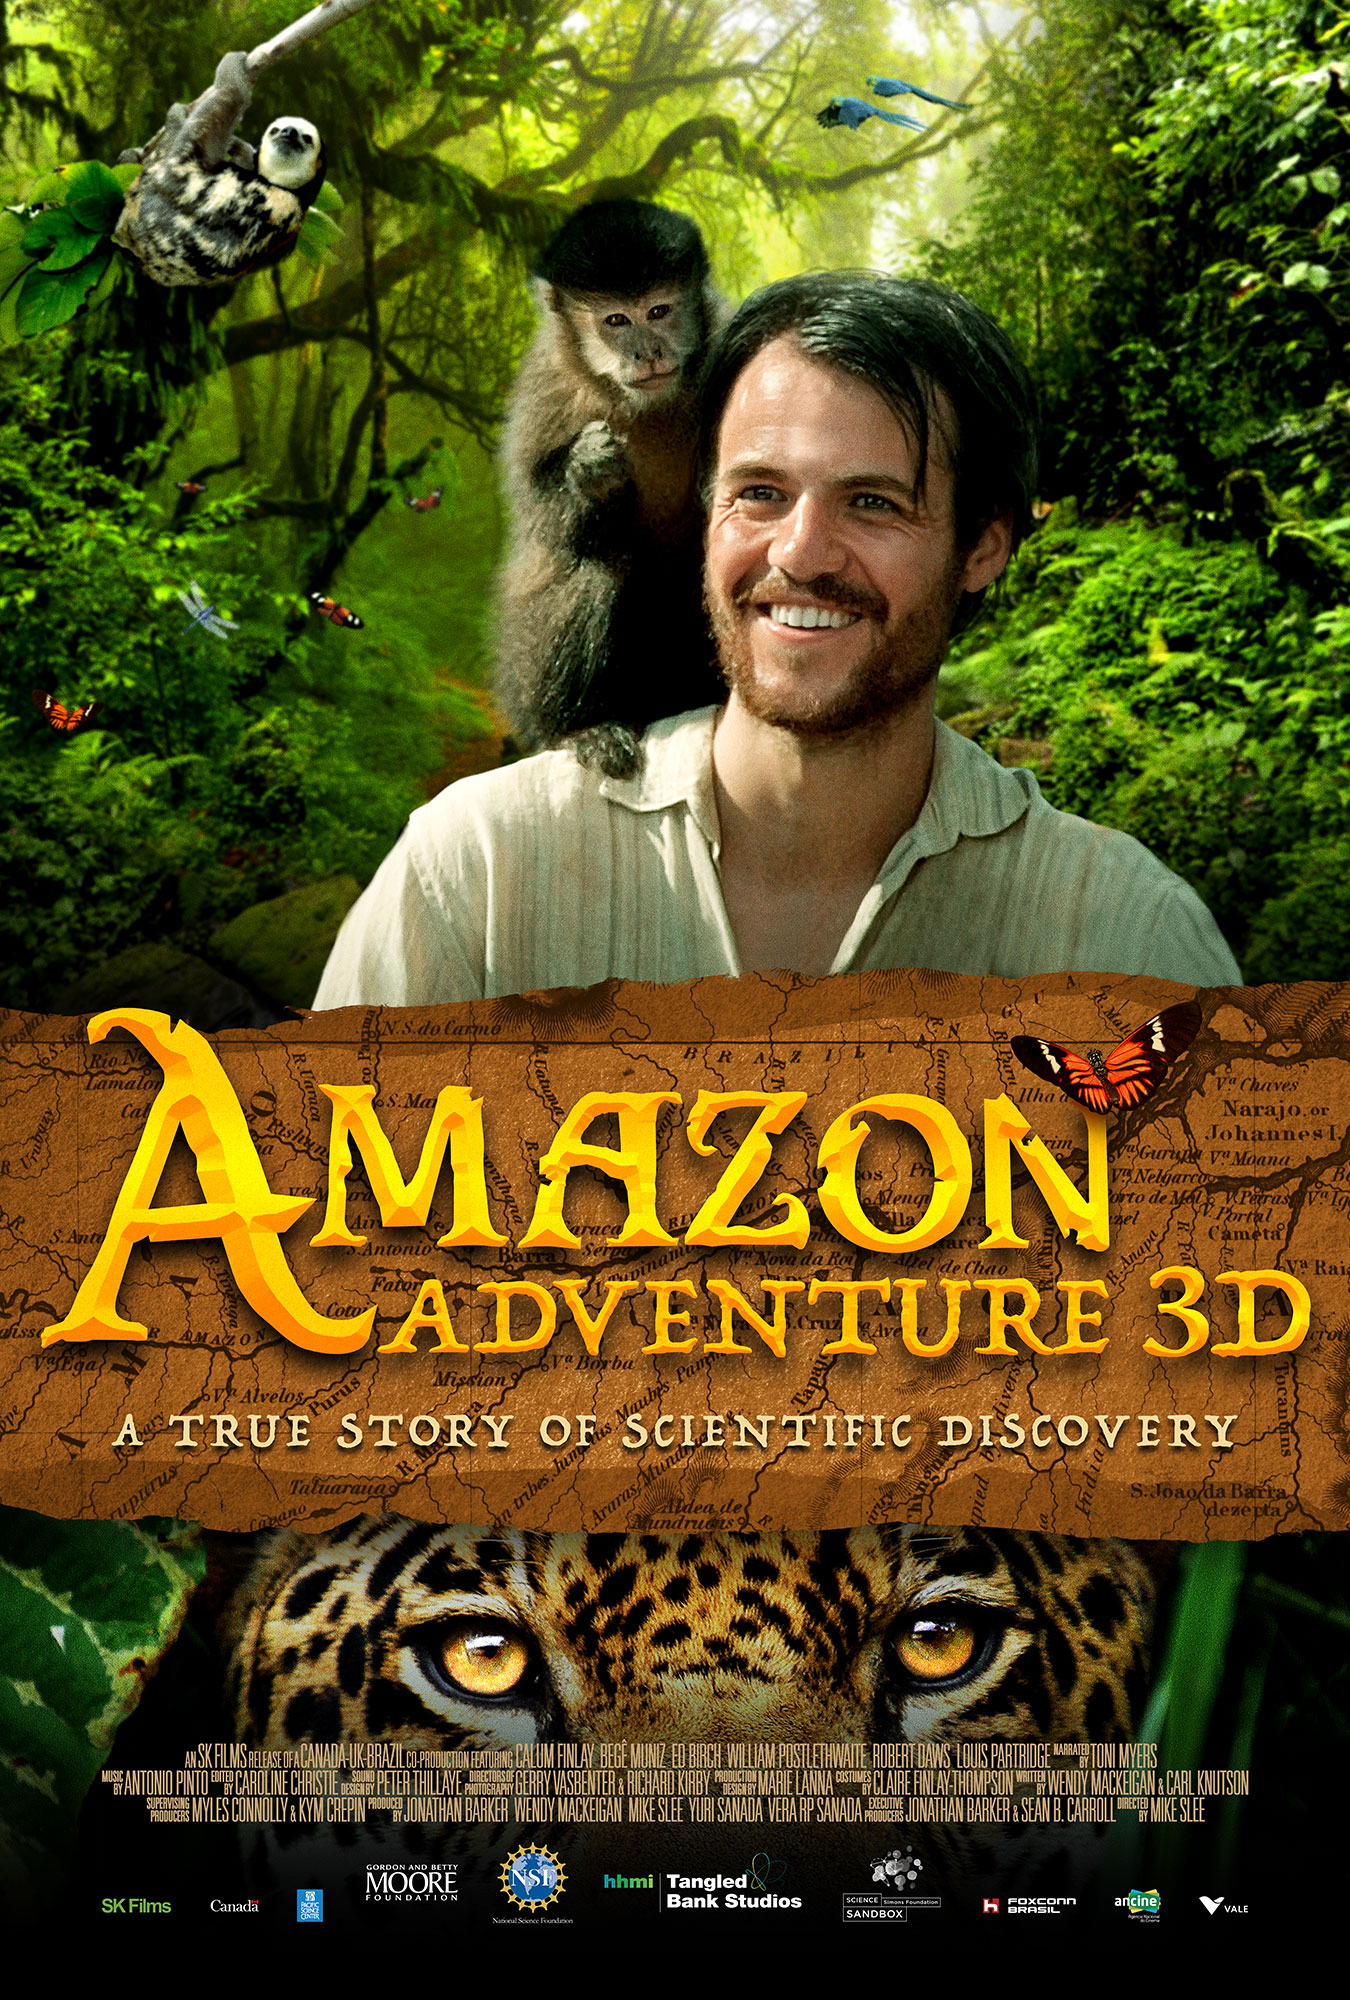 Amazon Adventure 3D: A True Story of Scientific Discovery key art featuring Henry Bates and Amazonian animals